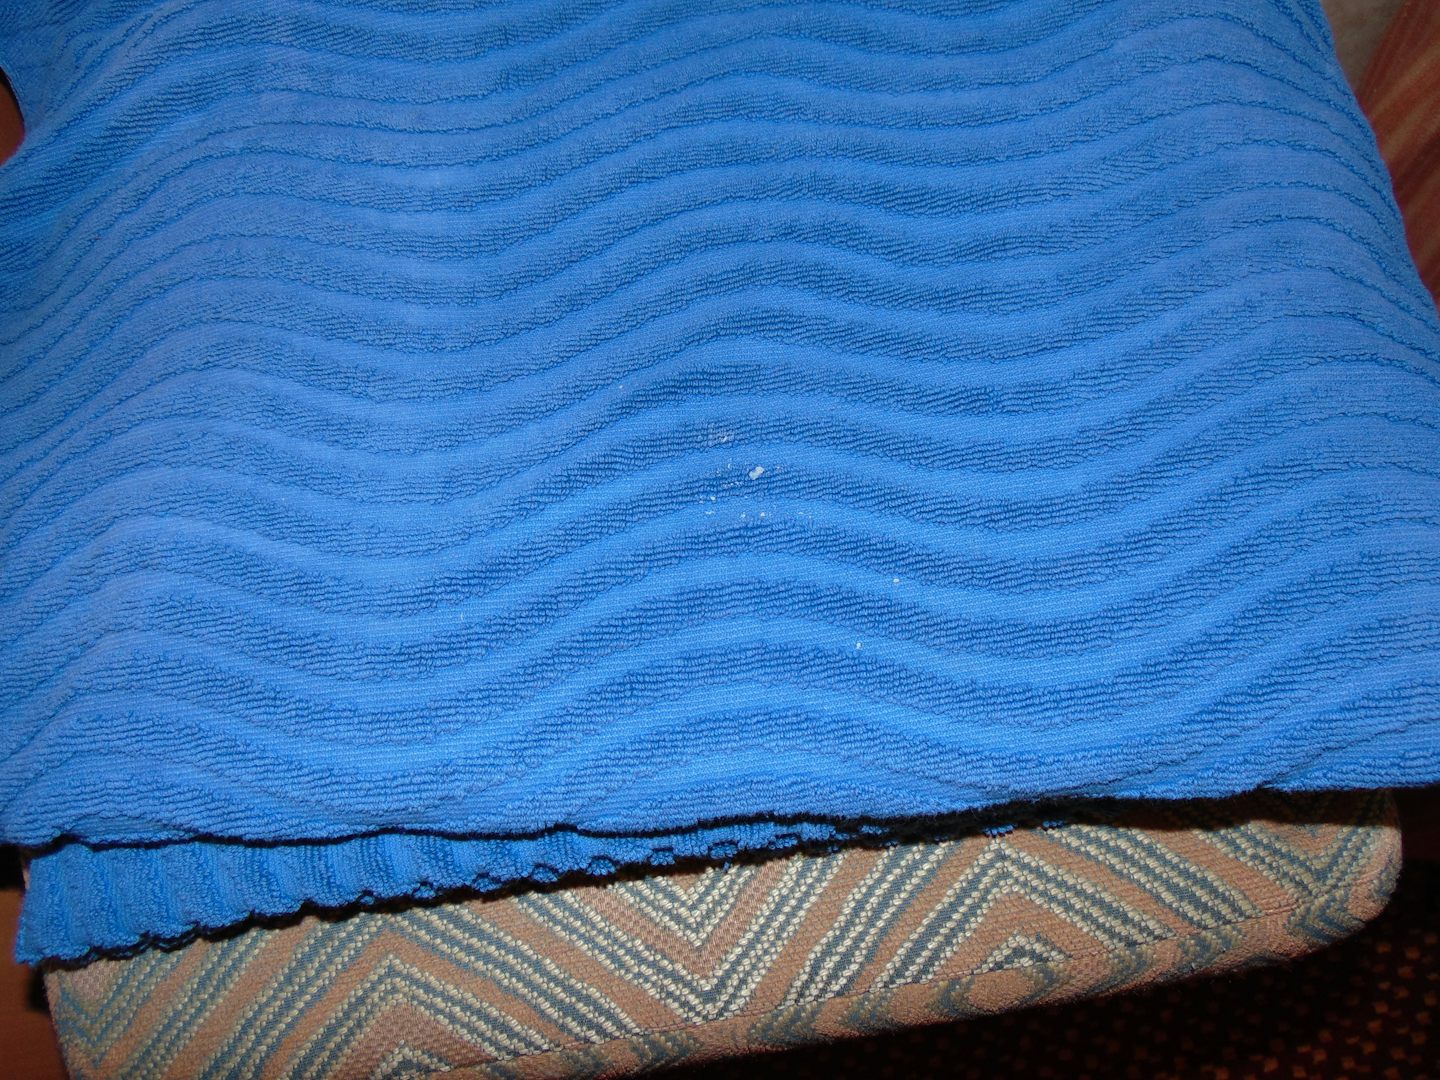 The beach towels with crust on it.